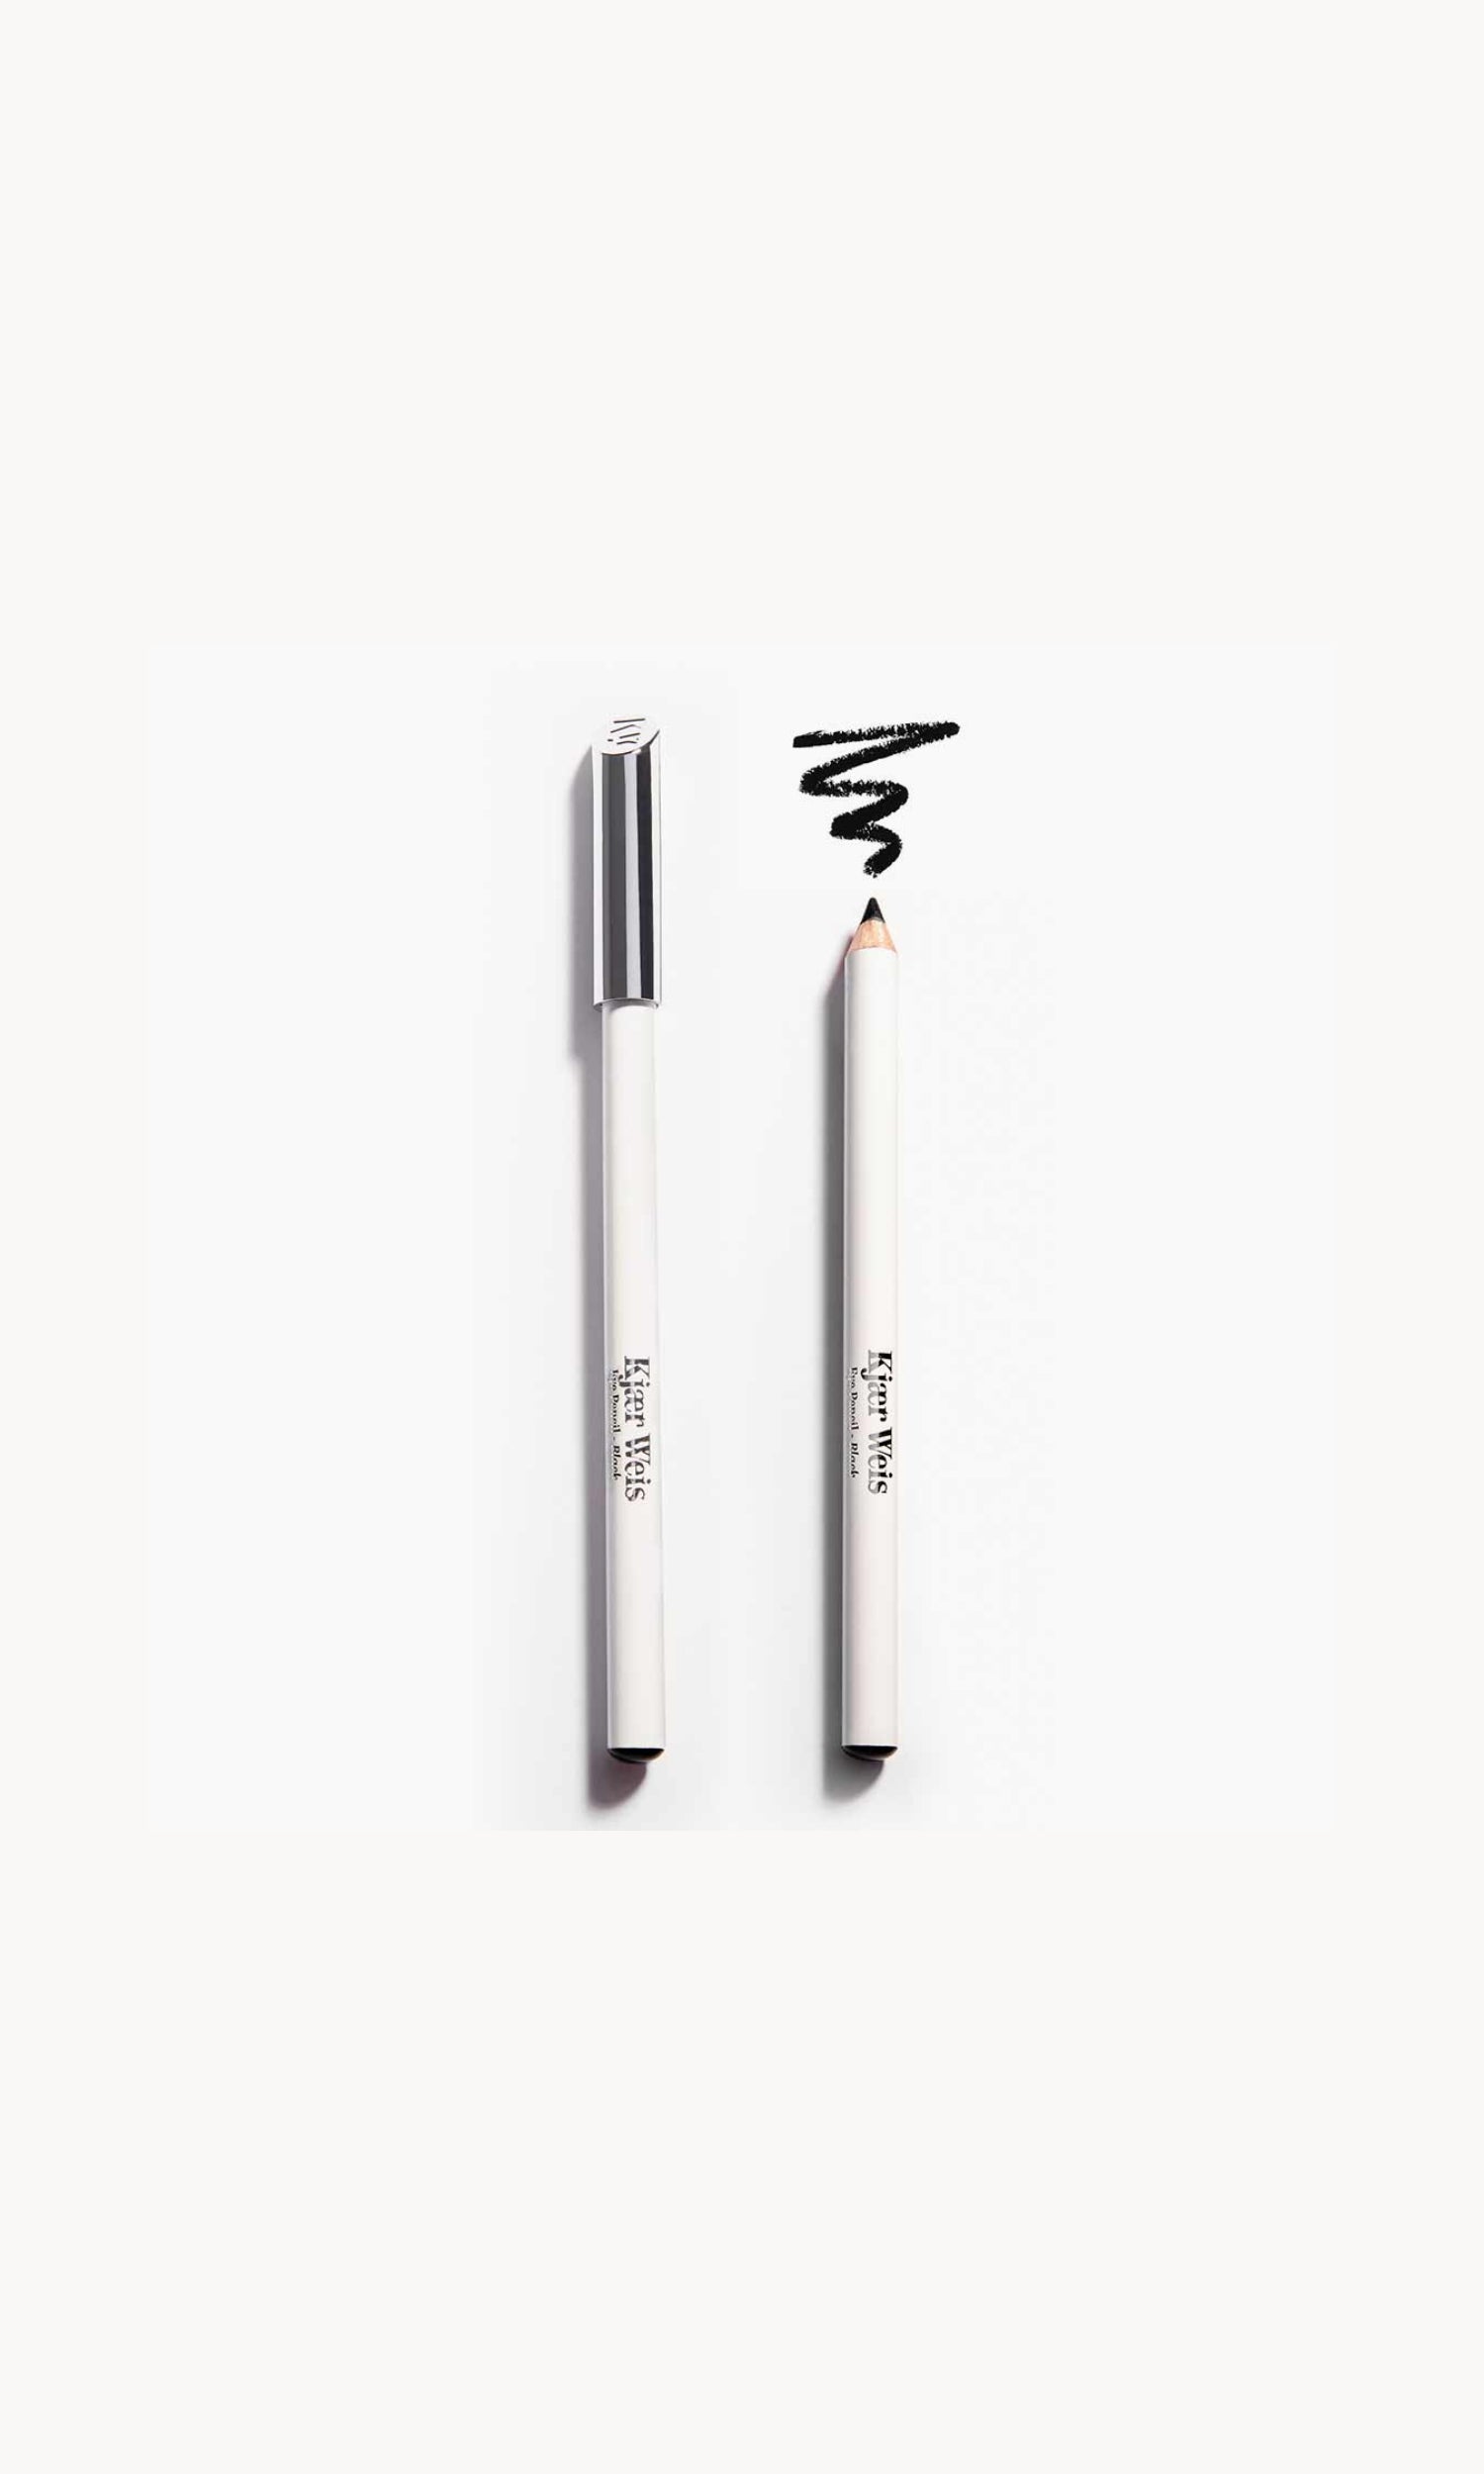 Two white pencils on a white background. Once pencil has a silver lid and the other shows the black pencil with a black line above it